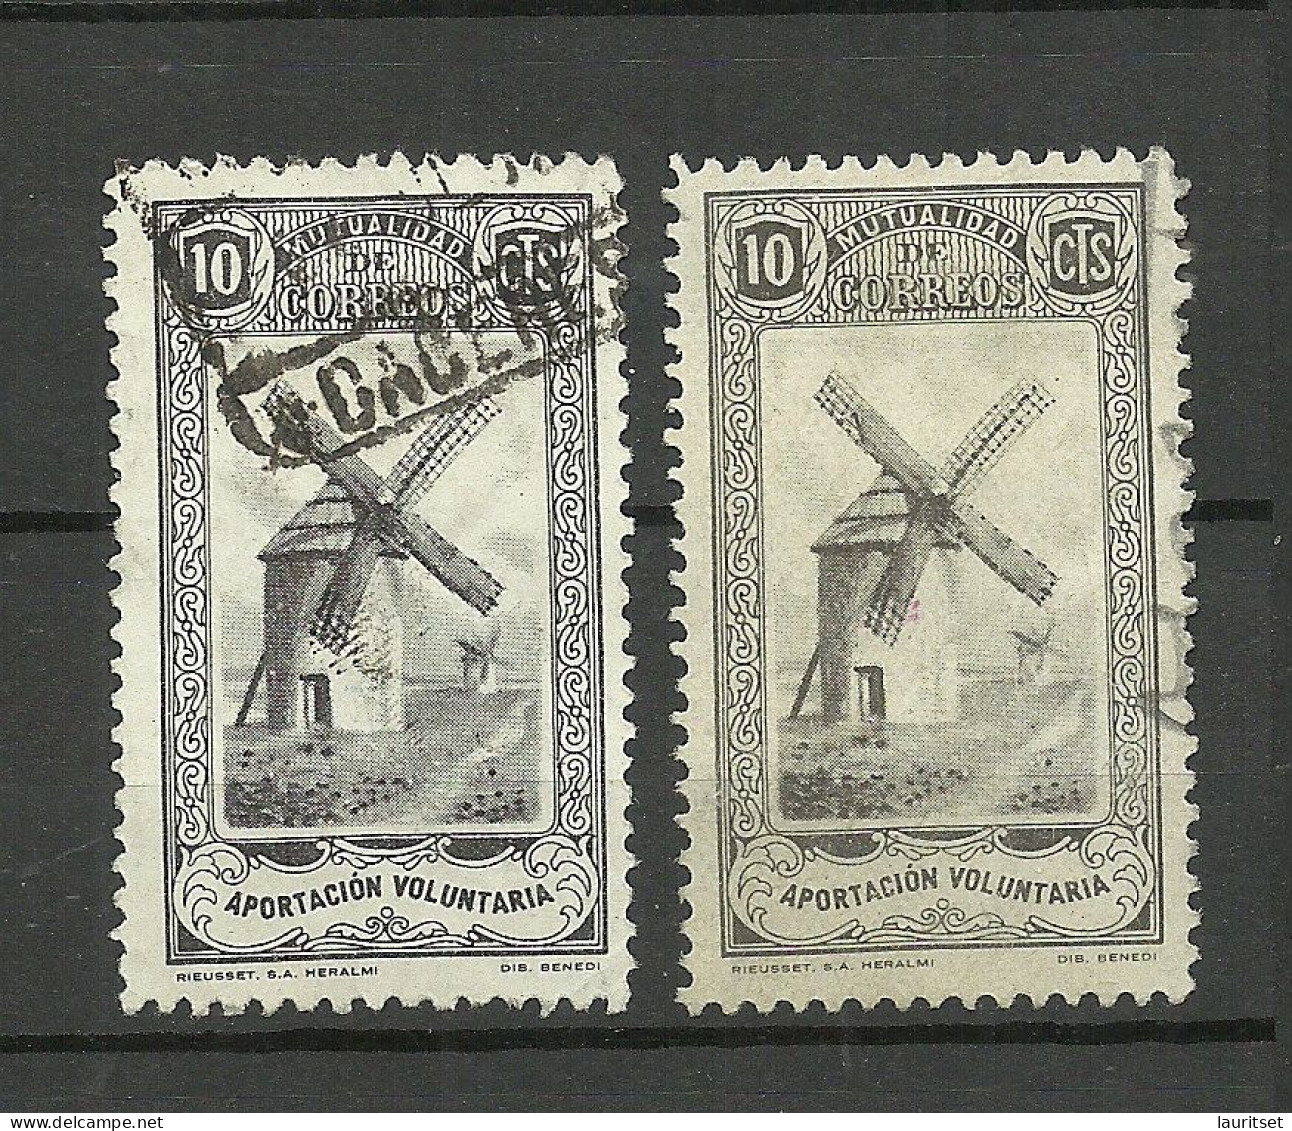 SPAIN Spanien Espana 1930ies Civil War Local Carity Wohlfahrt Wind Mill Windmühle - Color Chades, 2 Stamps, O - Molinos